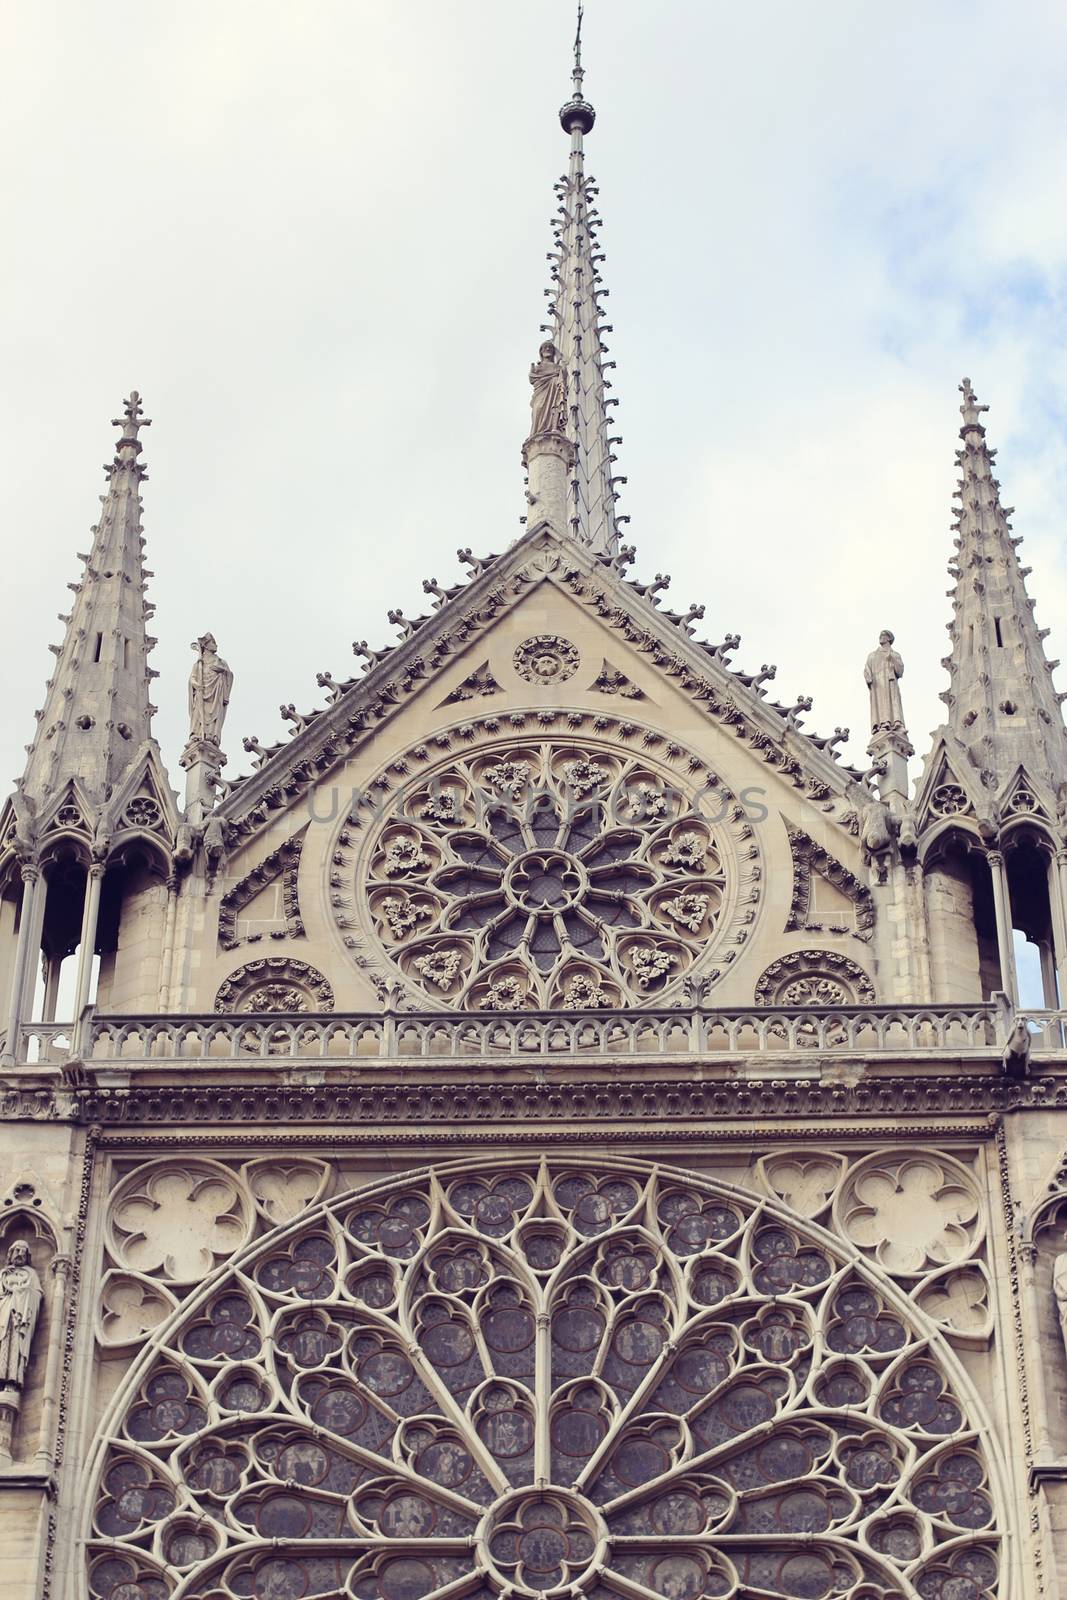 Architectural details of Cathedral Notre Dame de Paris. Cathedral Notre Dame de Paris - most famous Gothic, Roman Catholic cathedral on the eastern half of the Cite Island. France, Europe.